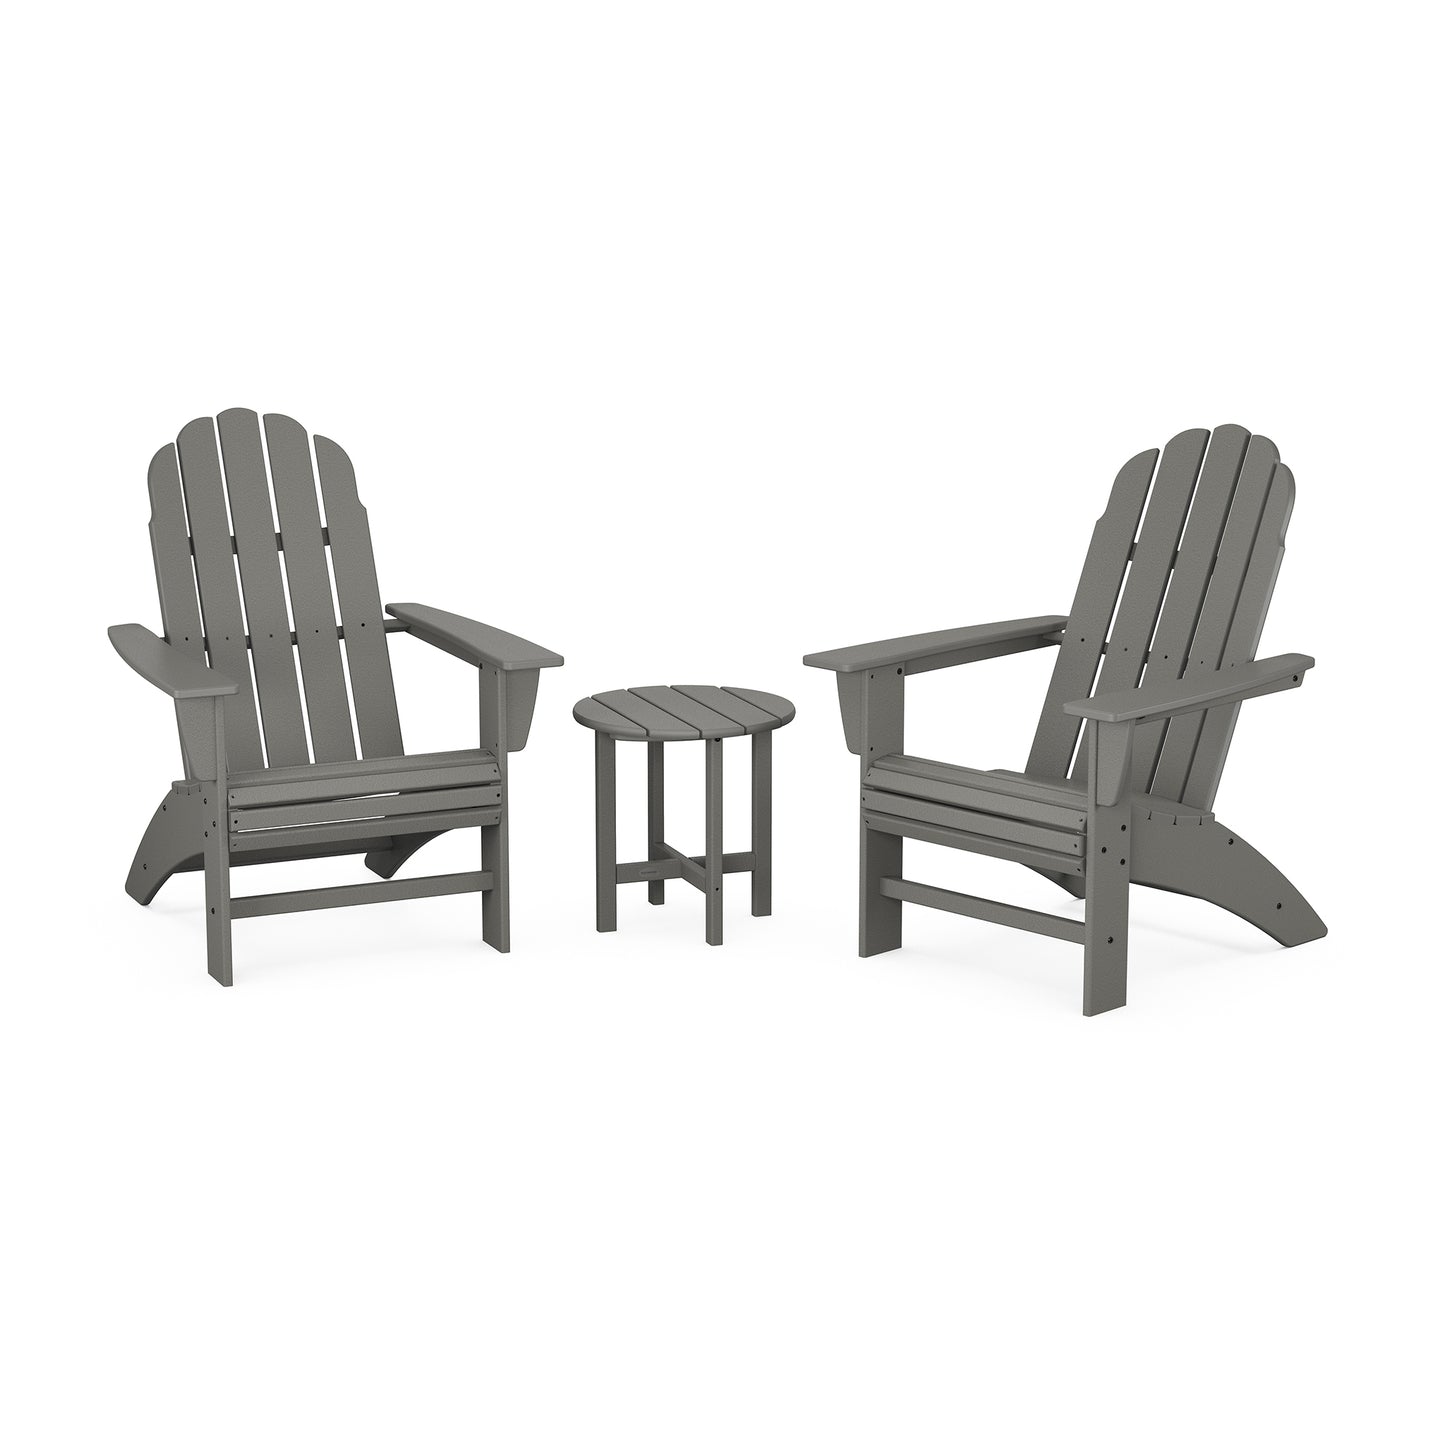 Two gray POLYWOOD Vineyard 3-Piece Curveback Adirondack Sets with a matching small round table, displayed against a plain white background. The chairs are angled towards each other, suggesting a conversational setting.